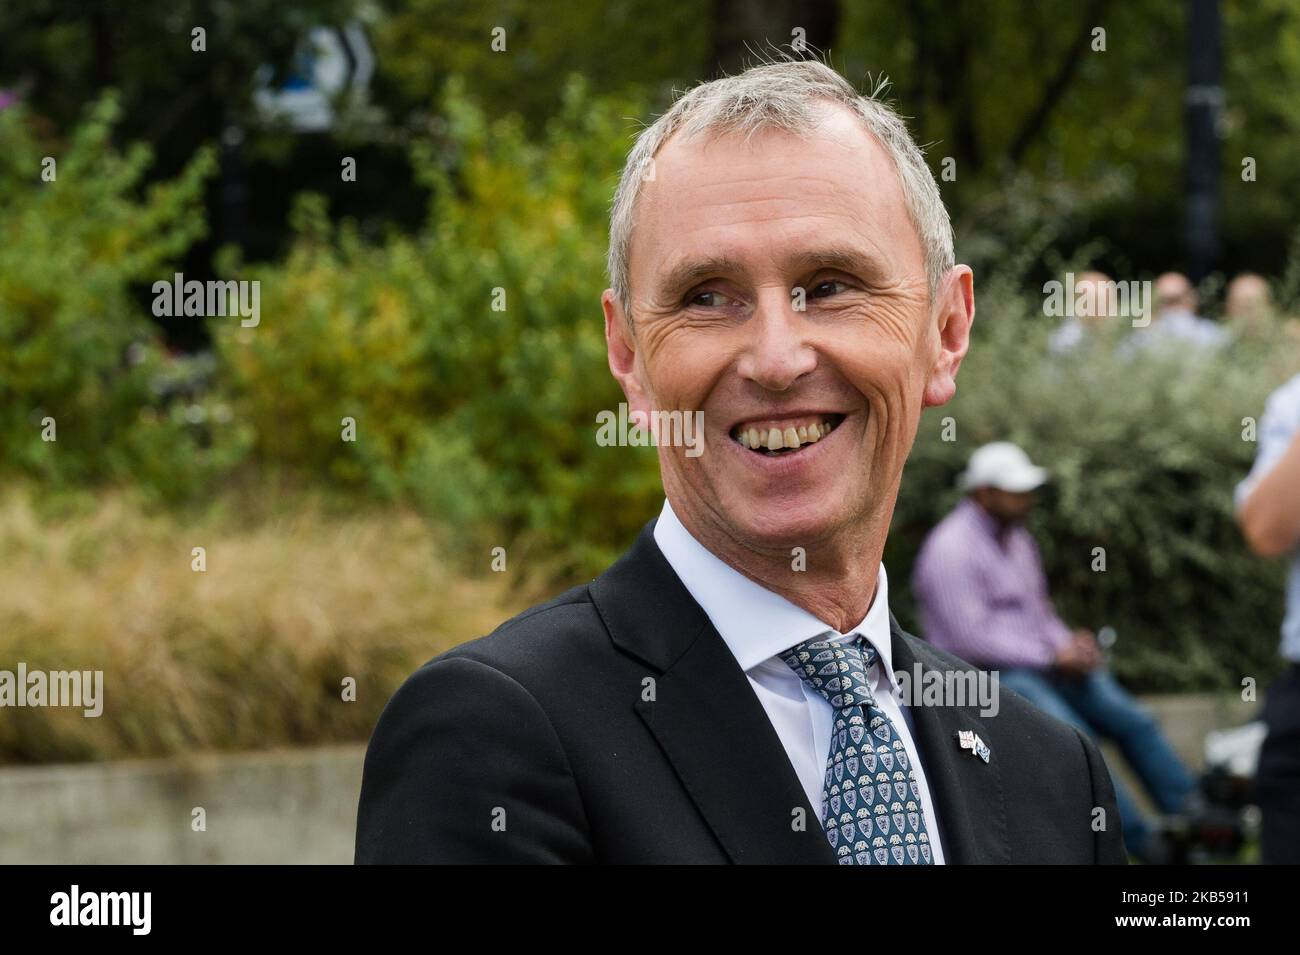 Tory MP Nigel Evans seen outside the Houses of Parliament on 04 September 2019 in London, England. Boris Johnson's govenment has lost a crucial vote yesterday as MPs voted to take control of the Commons agenda in an effort to prevent the UK leaving the EU on 31 October without a deal. (Photo by WIktor Szymanowicz/NurPhoto) Stock Photo